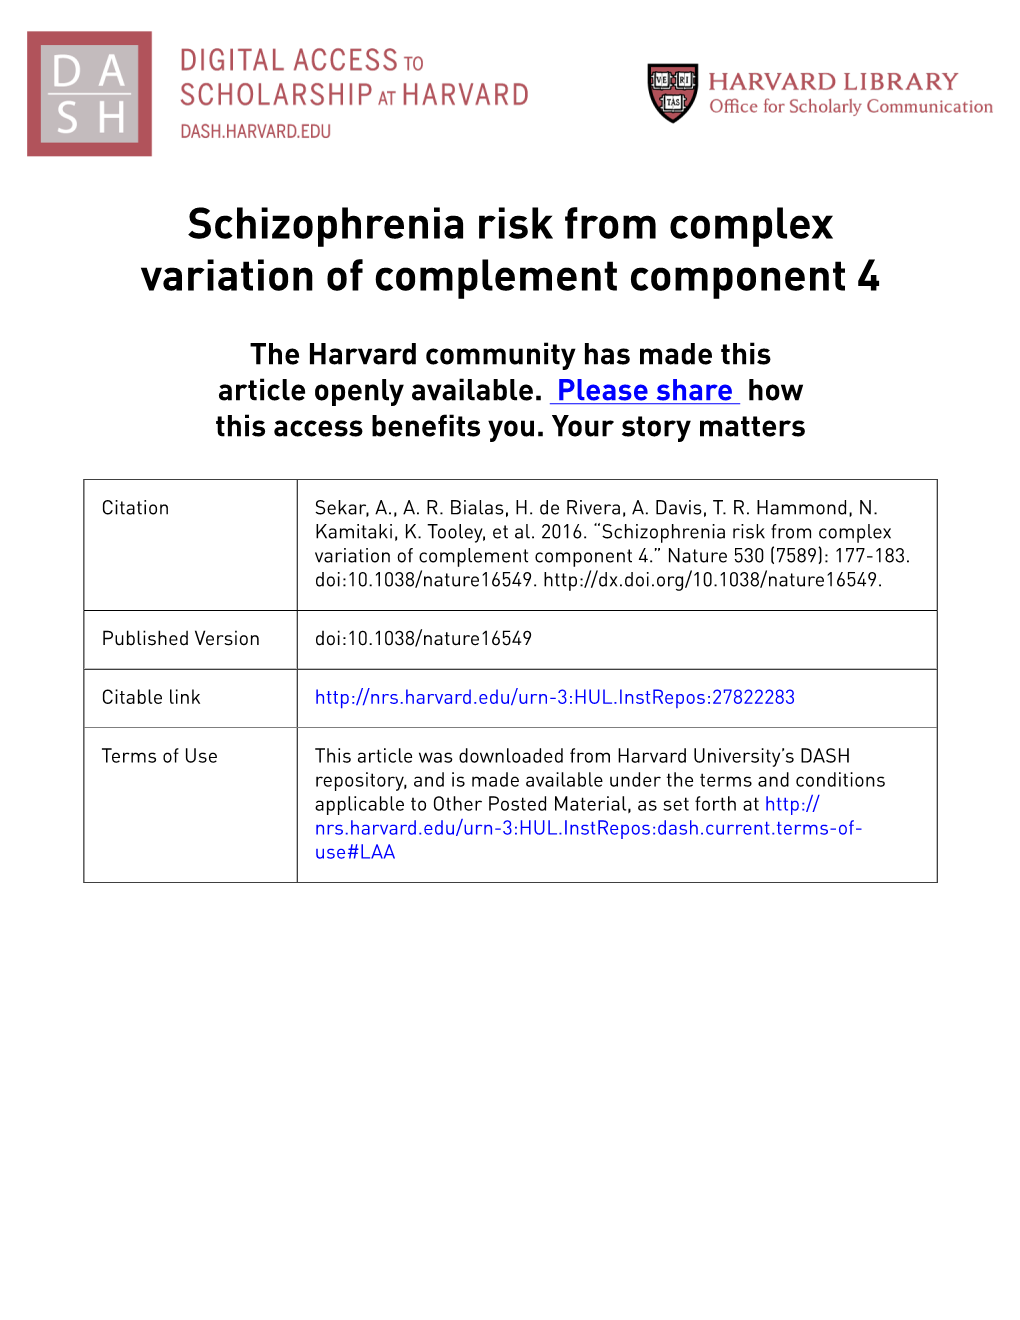 Schizophrenia Risk from Complex Variation of Complement Component 4